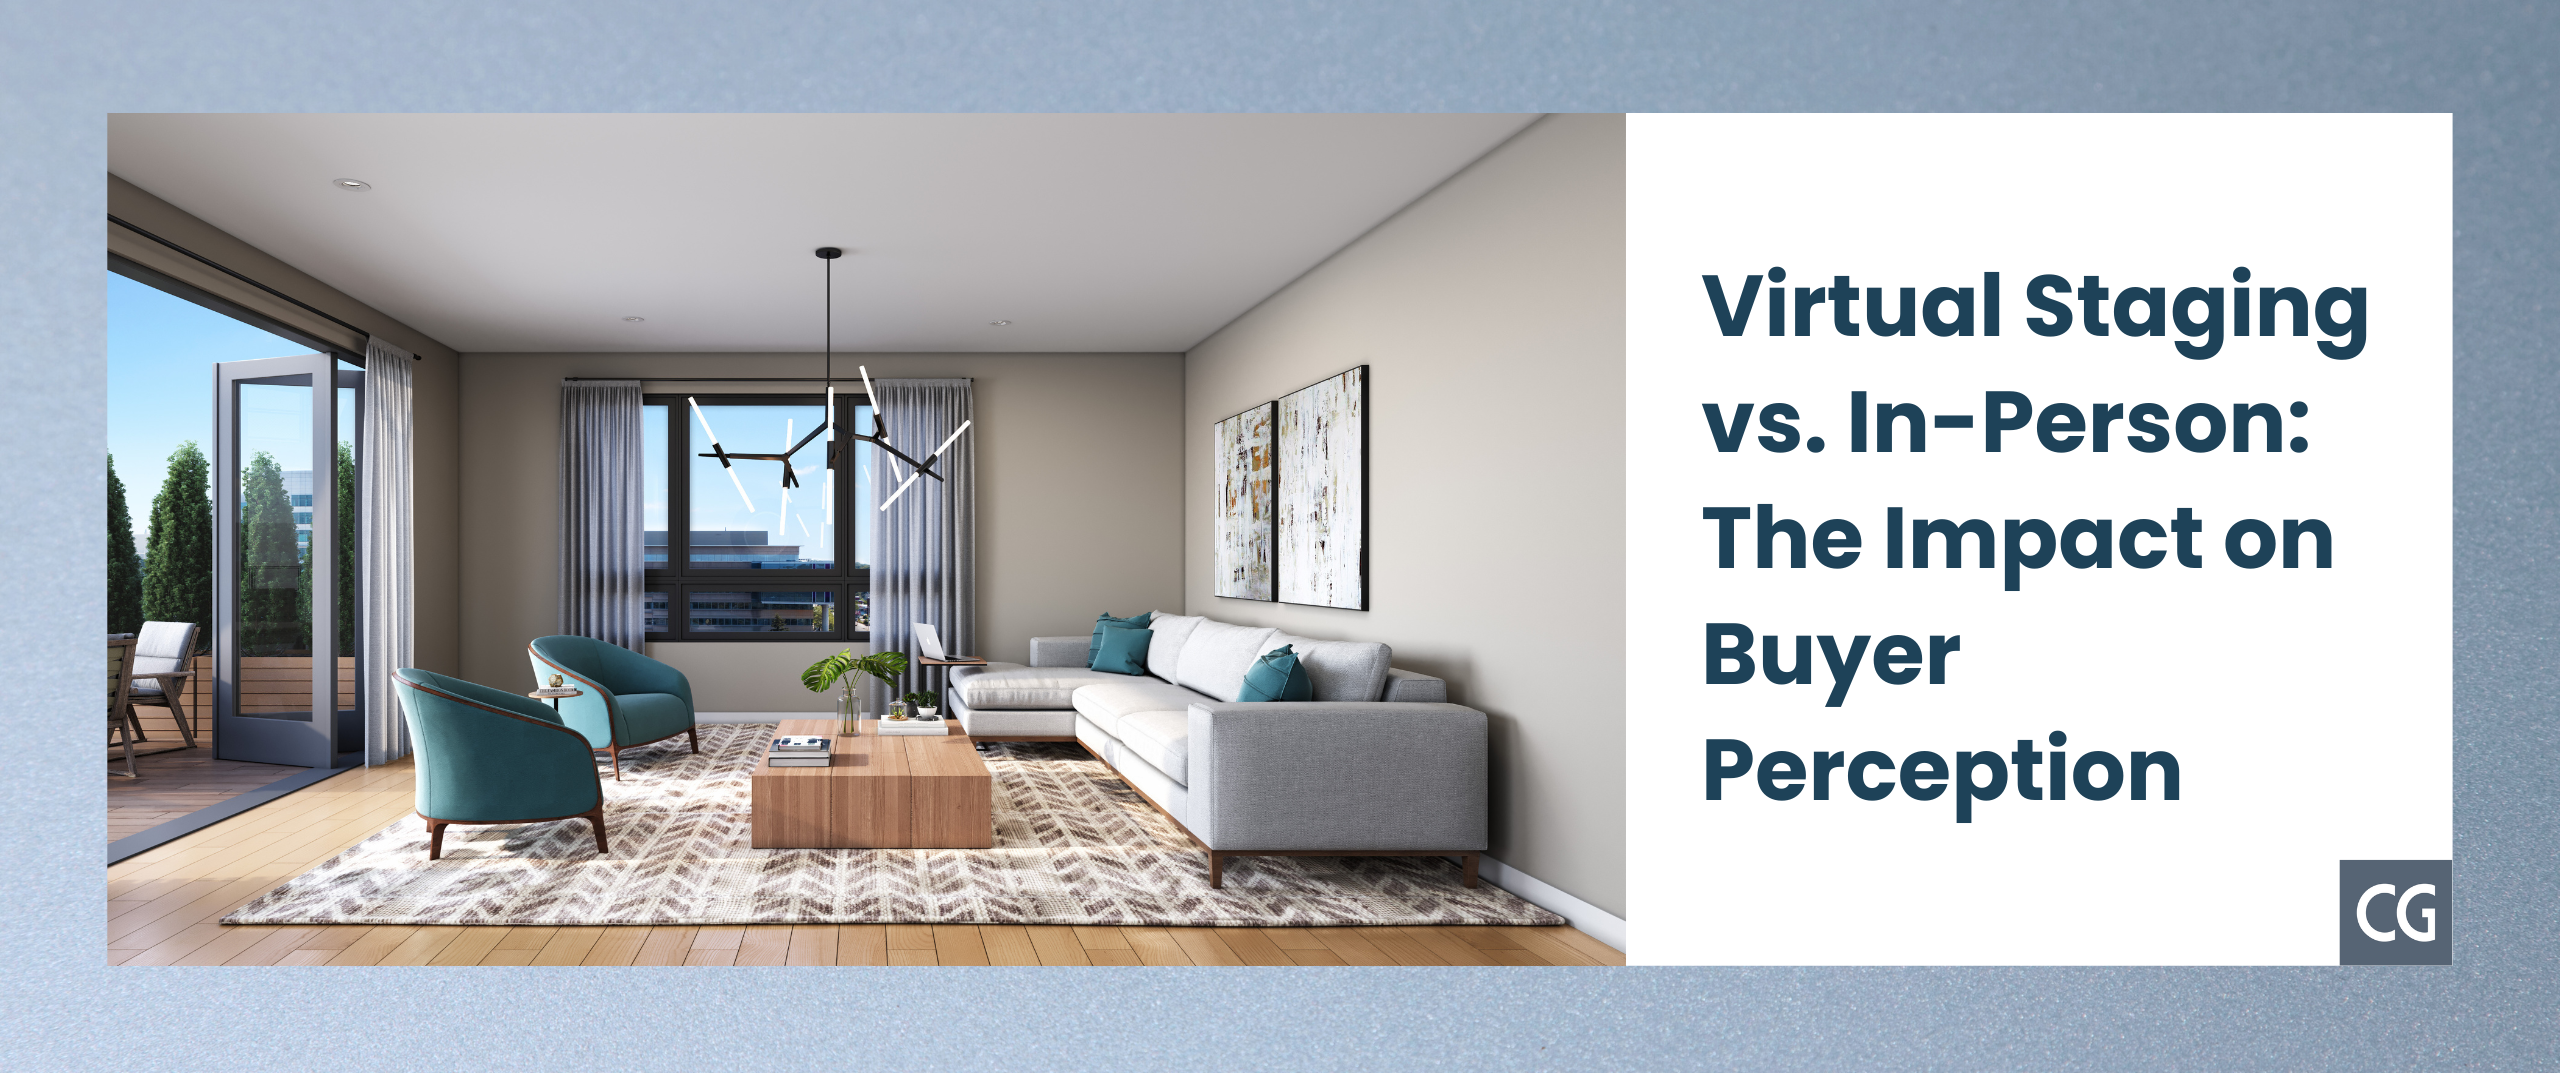 Virtual Staging vs. In-Person: The Impact on Buyer Perception